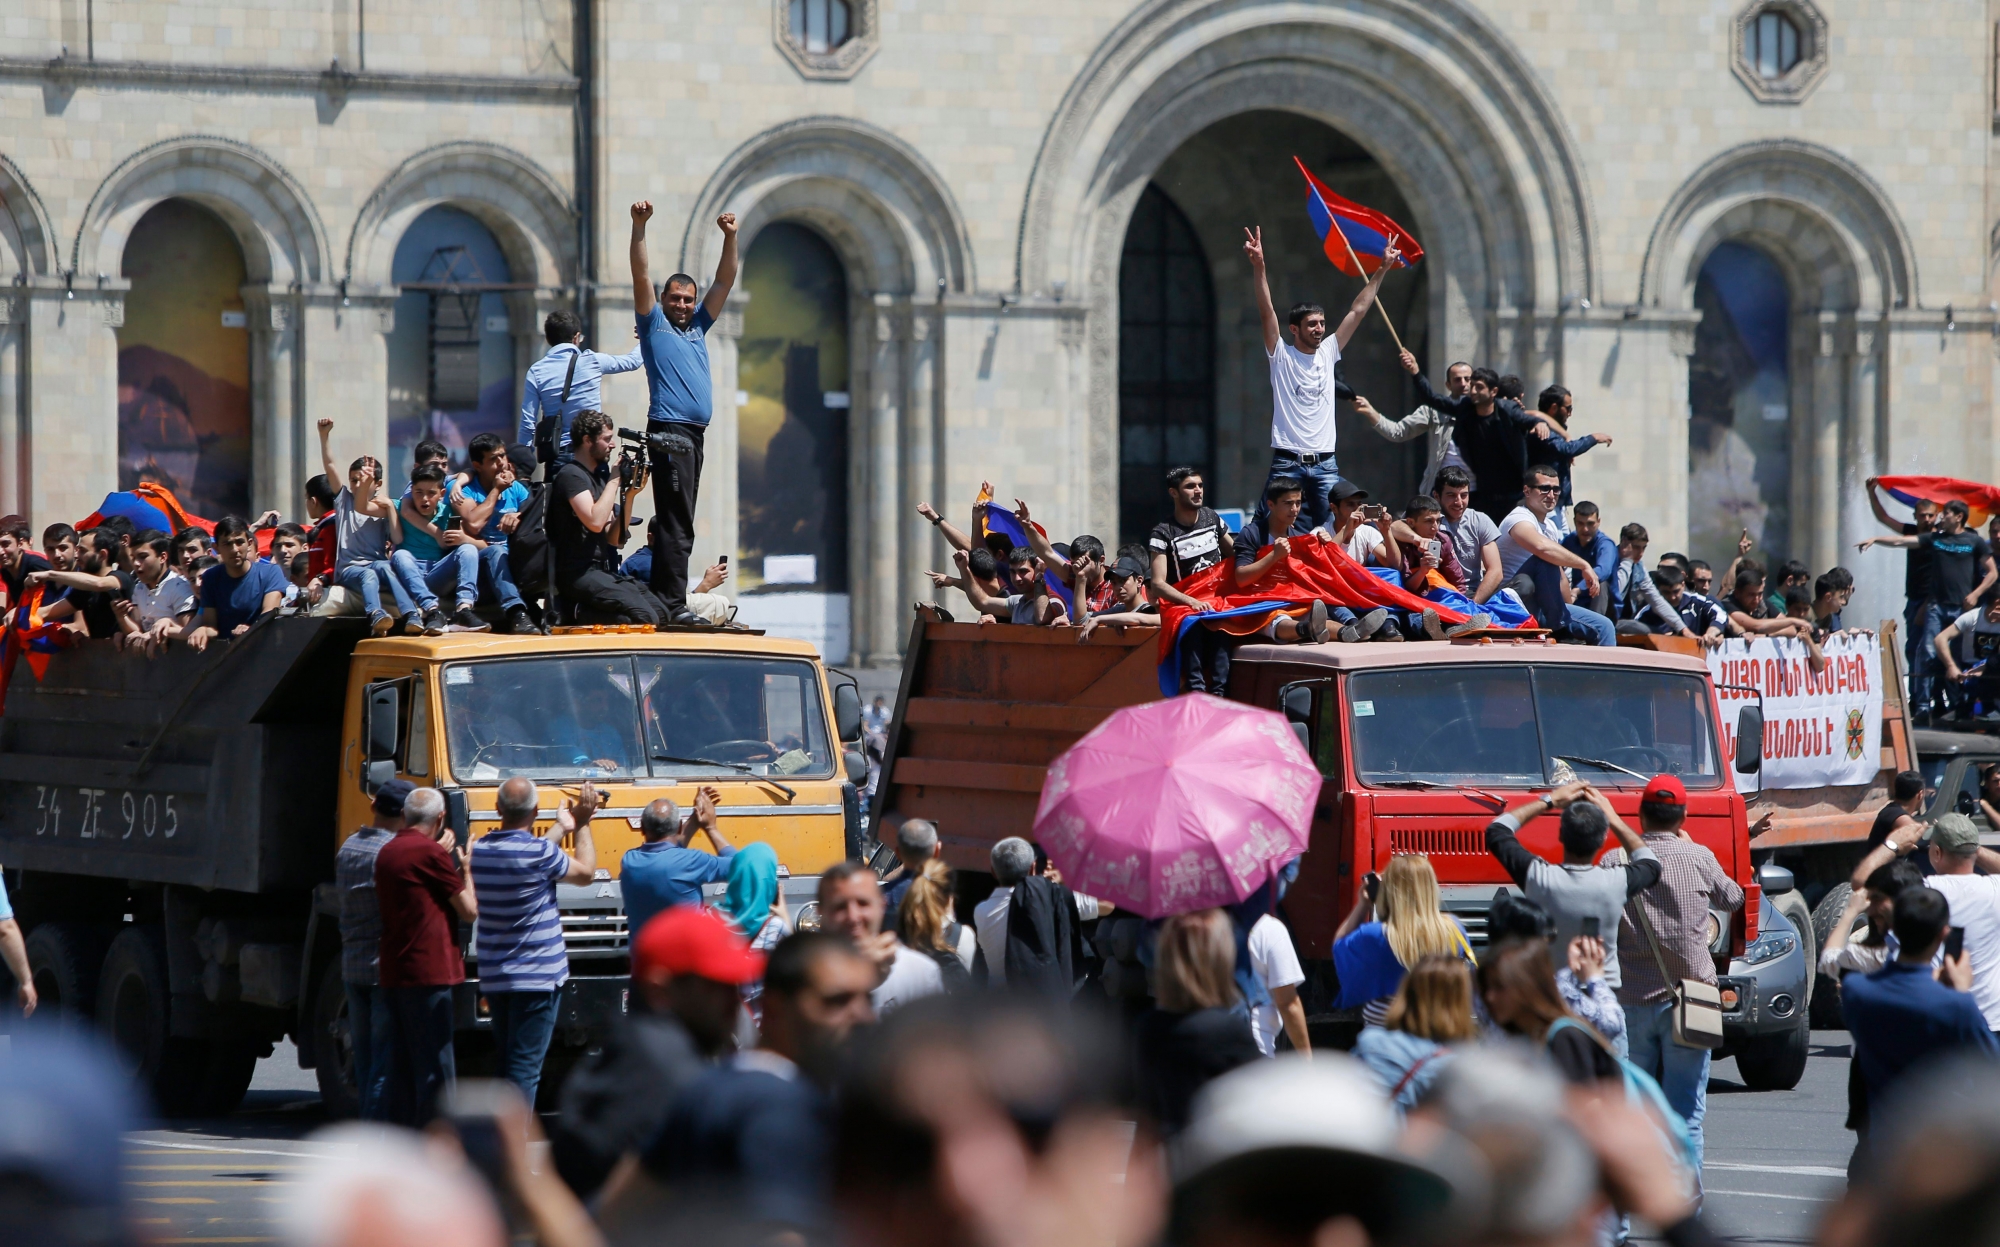 epa06706223 Armenian protestors ride on trucks as they block a street in Yerevan, Armenia, 02 May 2018. Opposition supporters demand that the acting prime minister, a representative of the ruling Republican Party of Armenia, be replaced by a people's candidate before early parliamentary elections take place.  EPA/ZURAB KURTSIKIDZE ARMENIA OPPOSITION RALLY